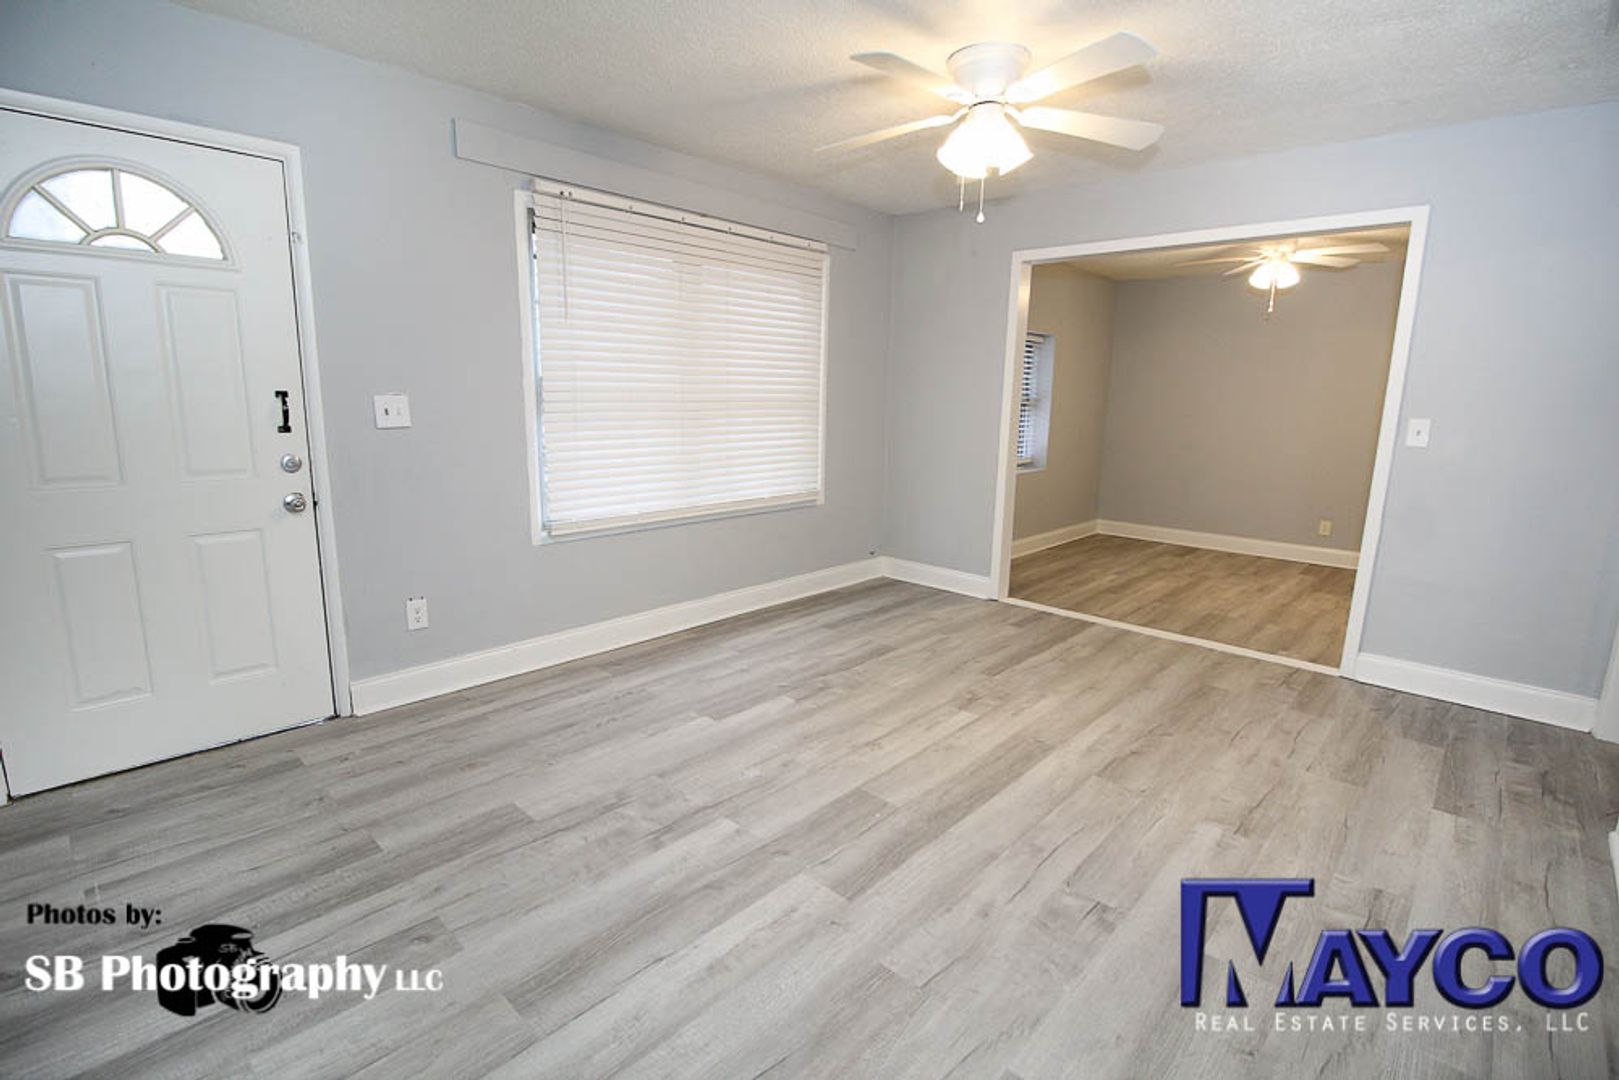 3 bedroom remodeled home in Southern Hills!